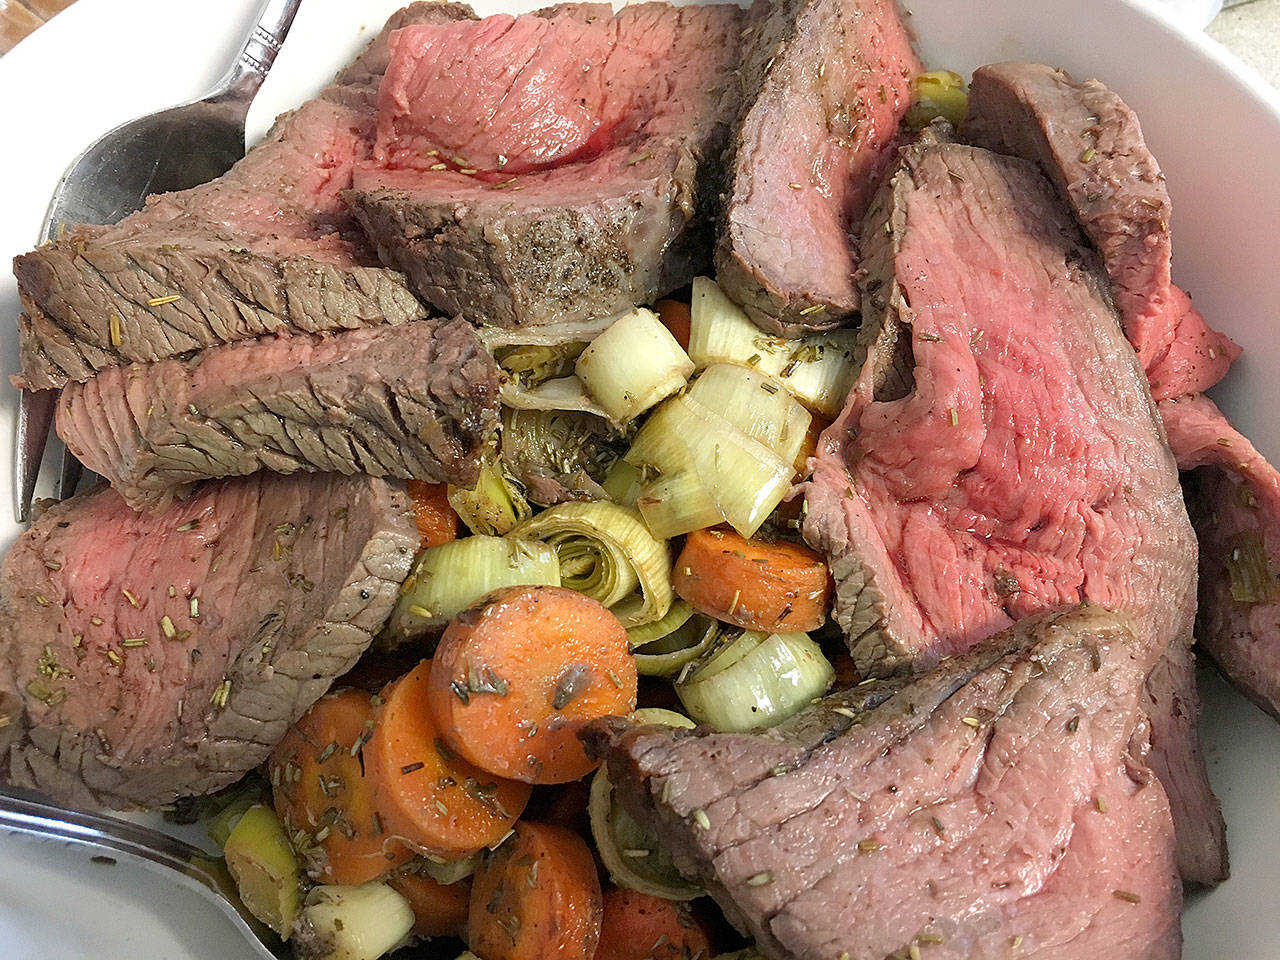 The roast aurochs with carrots and leeks, ready to be served, is a hearty dish from the cookbook, “A Feast of Ice & Fire: The Official Companion Cookbook” to the HBO show “Game of Thrones.” (Ben Watanabe / The Herald)